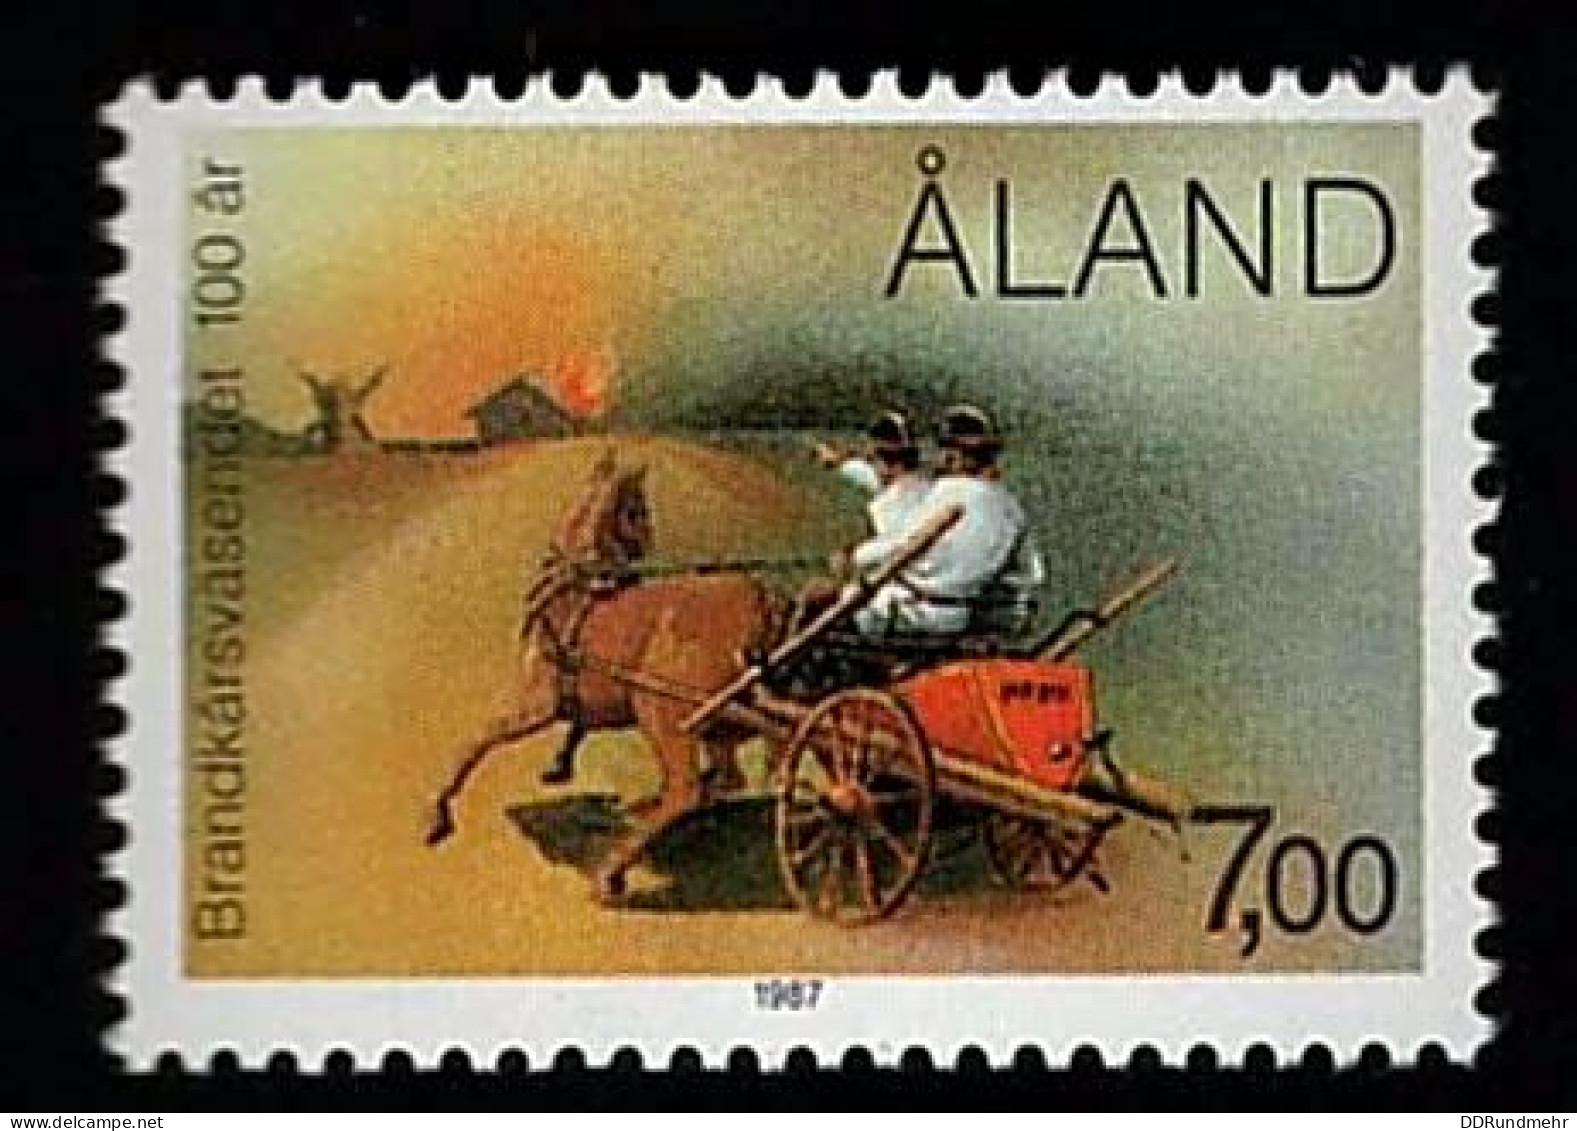 1987 Fire Brigade  Michel AX 23 Stamp Number AX 26 Yvert Et Tellier AX 23 Stanley Gibbons AX 28 Xx MNH - Aland